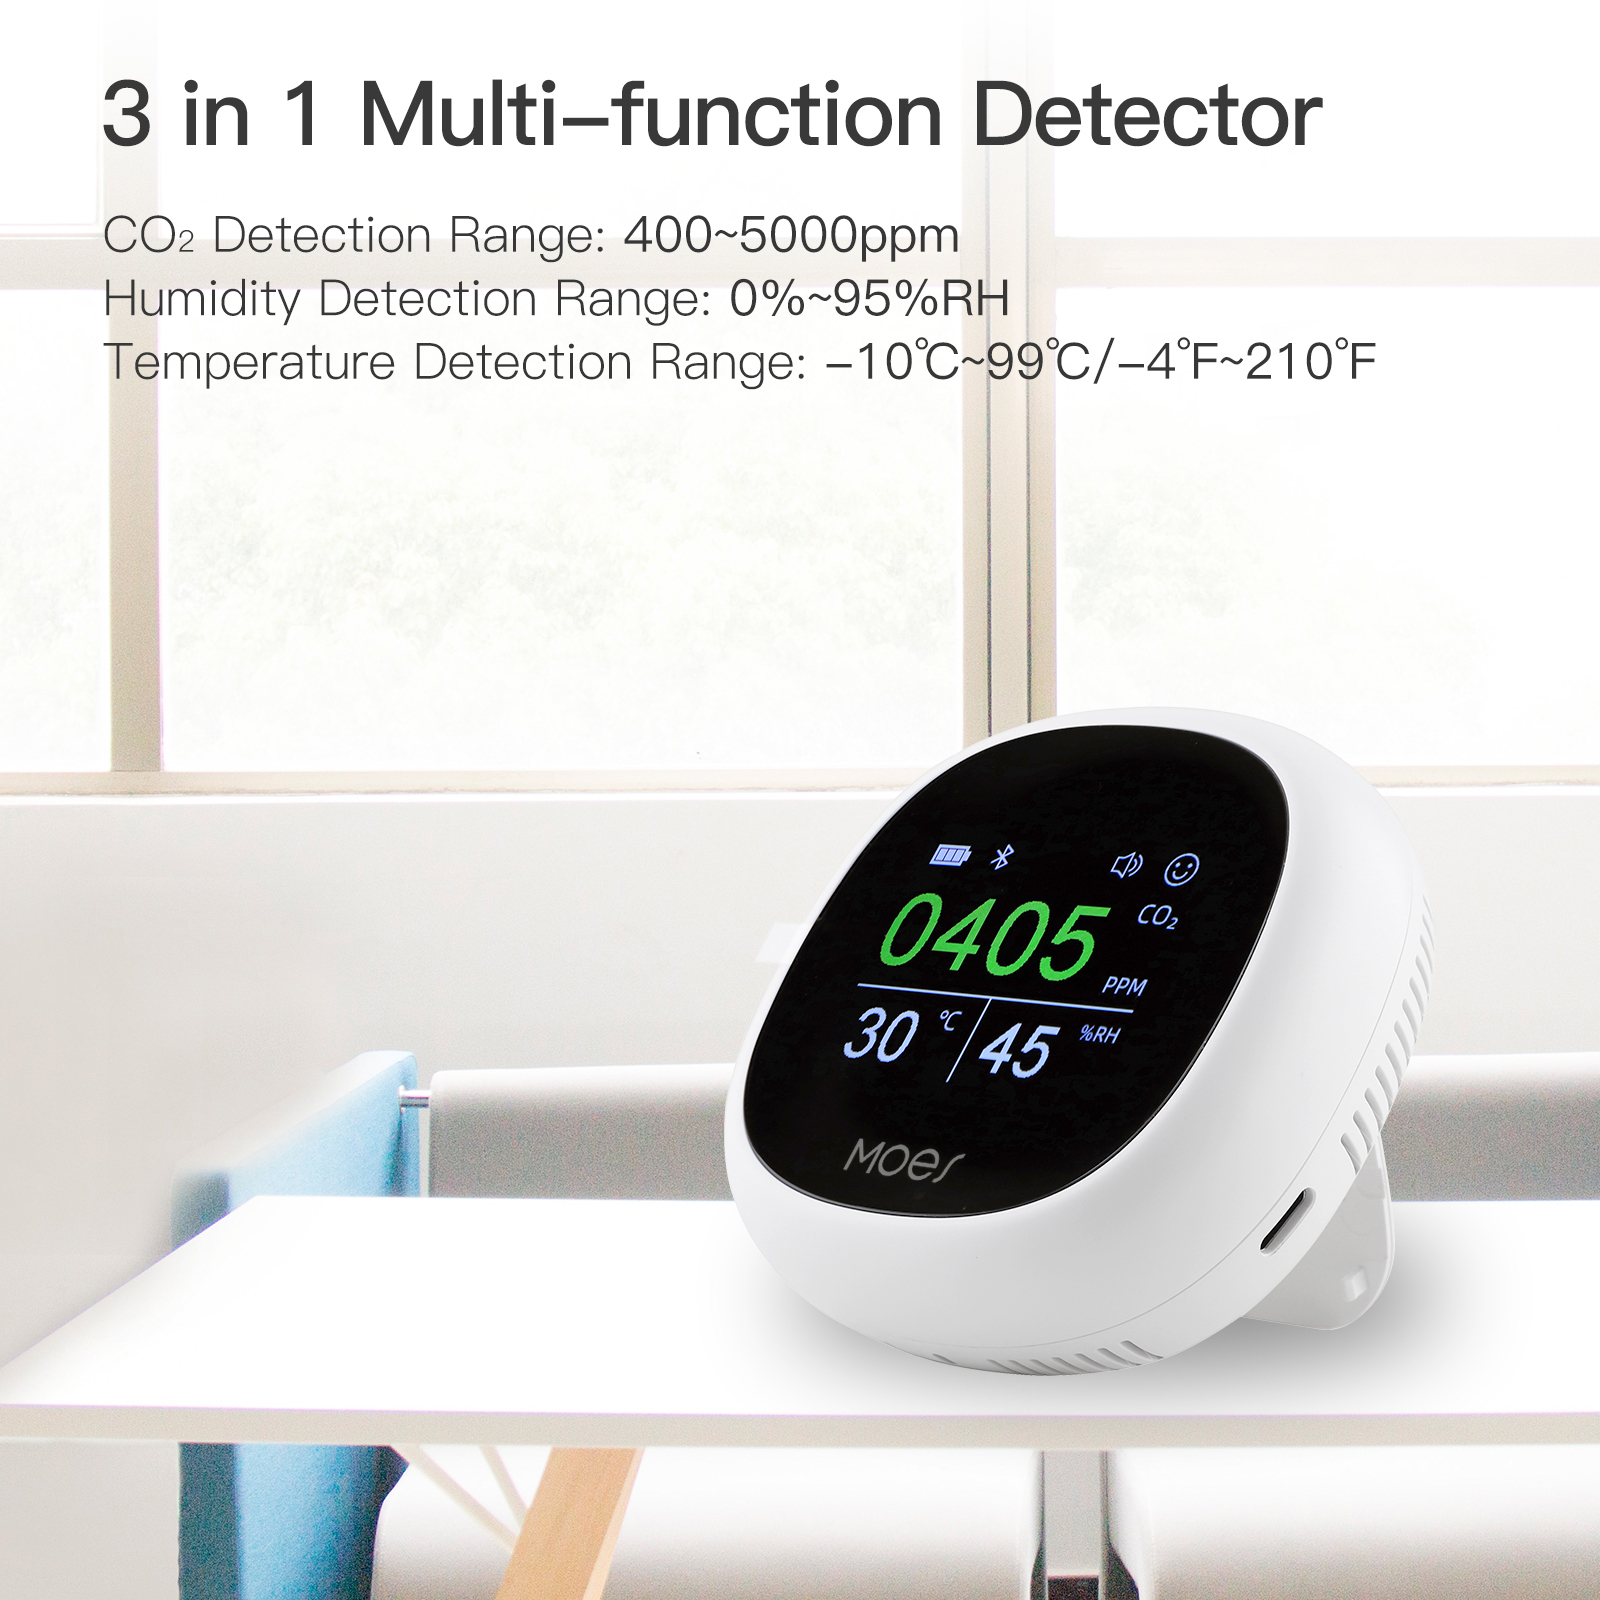 MoesHouse Tuya bluetooth 3 in 1 Multi-functional Air Monitor Temperature Humidity Carbon Dioxide Sensor with Alarm Clock for Home Safety Precaution Device